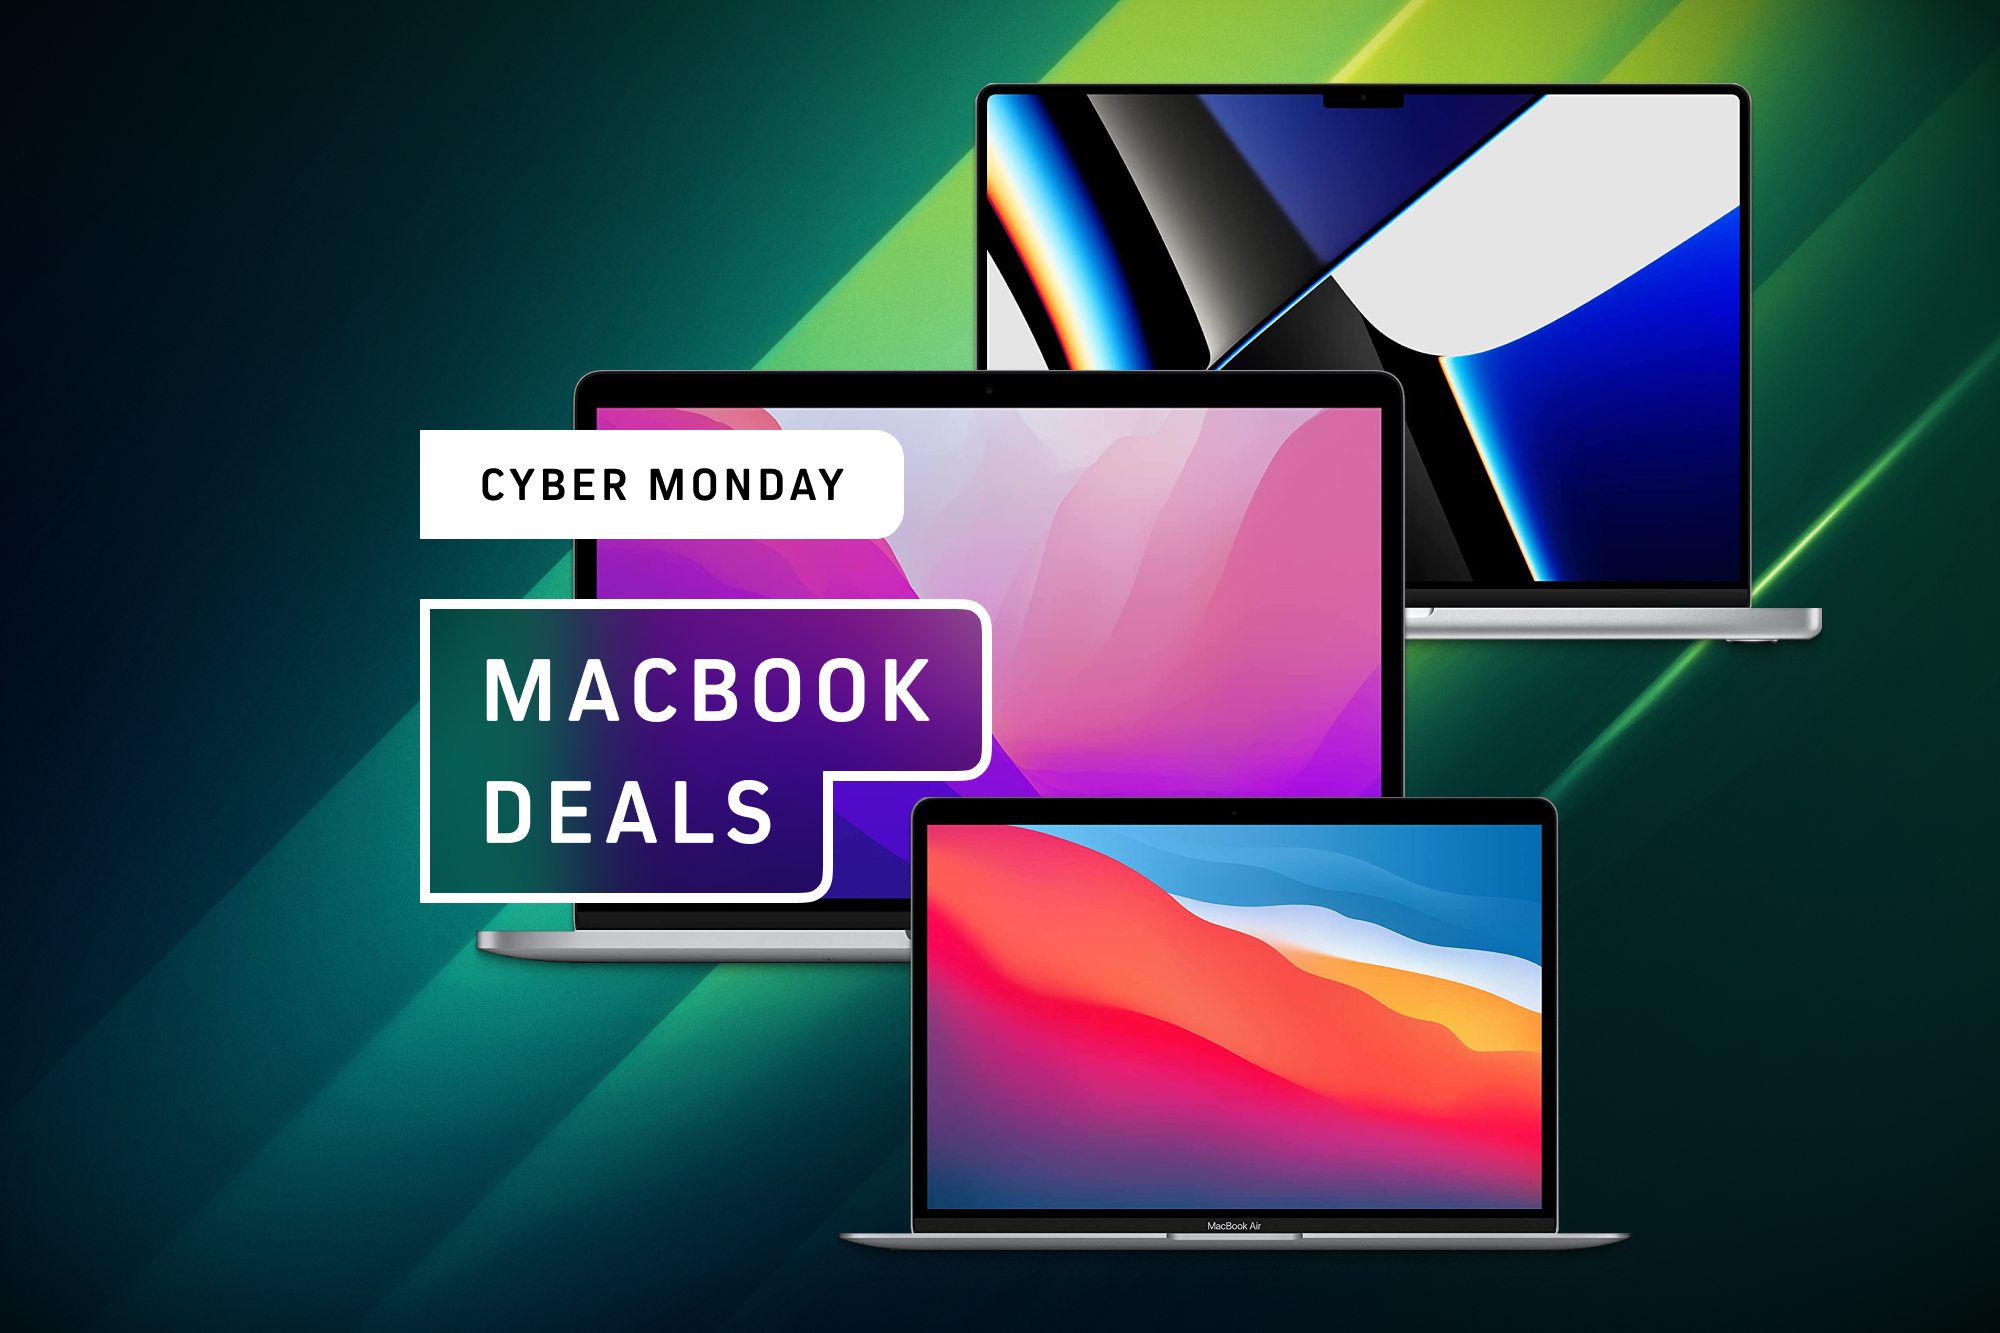 The best Cyber Monday MacBook deals for 2022